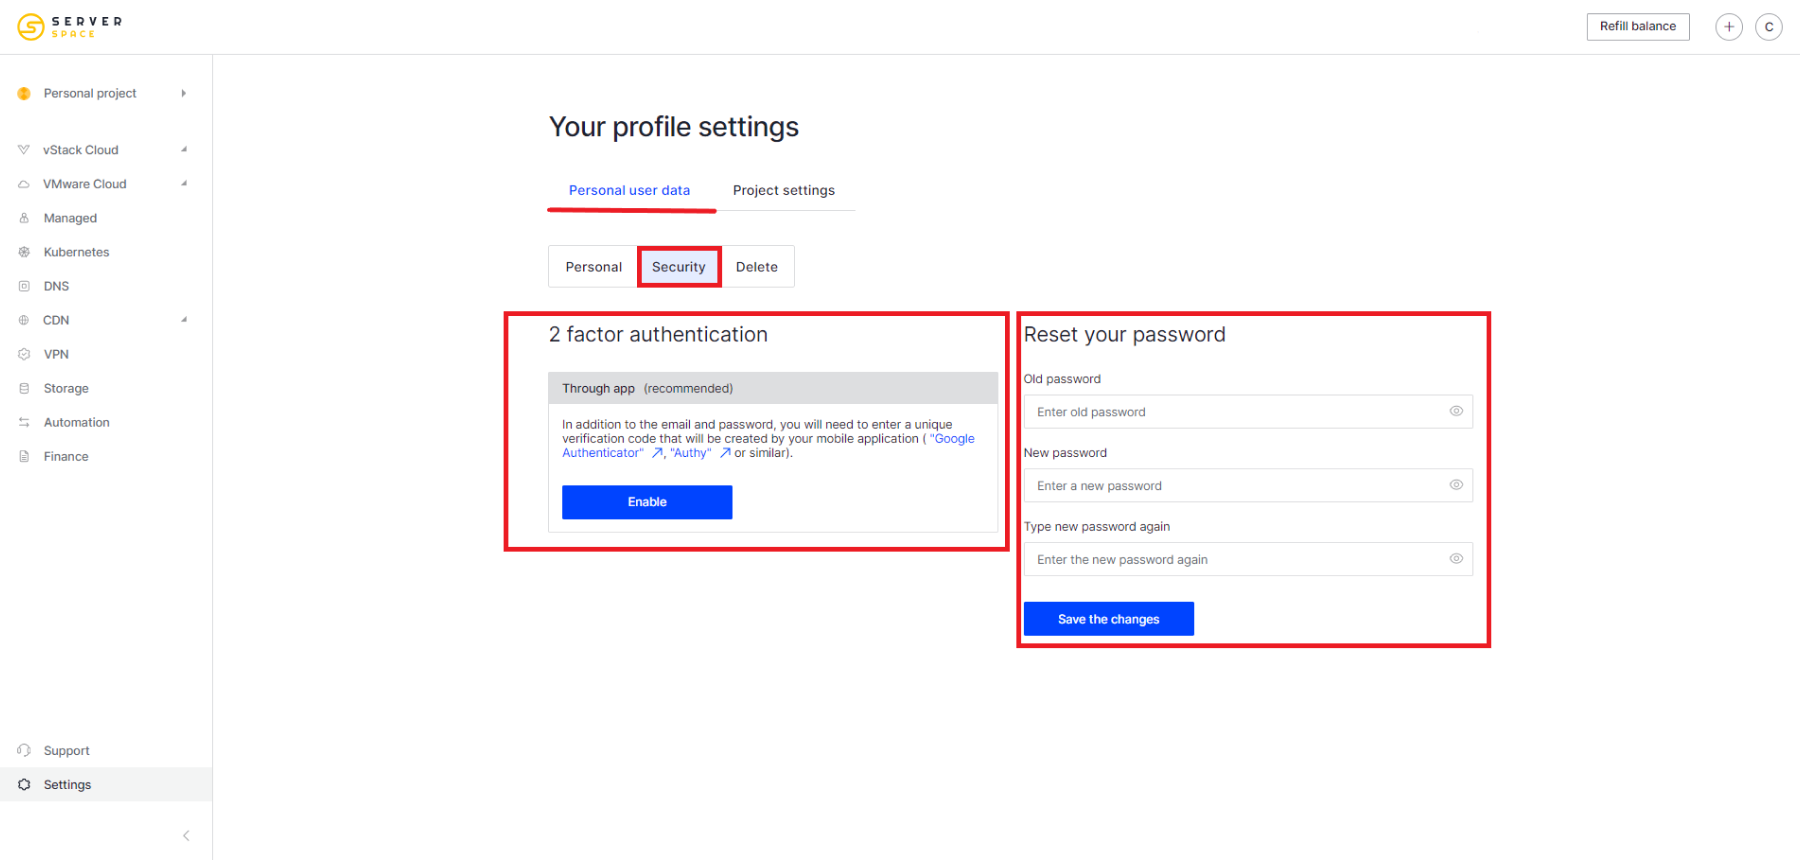 Security in personal settings